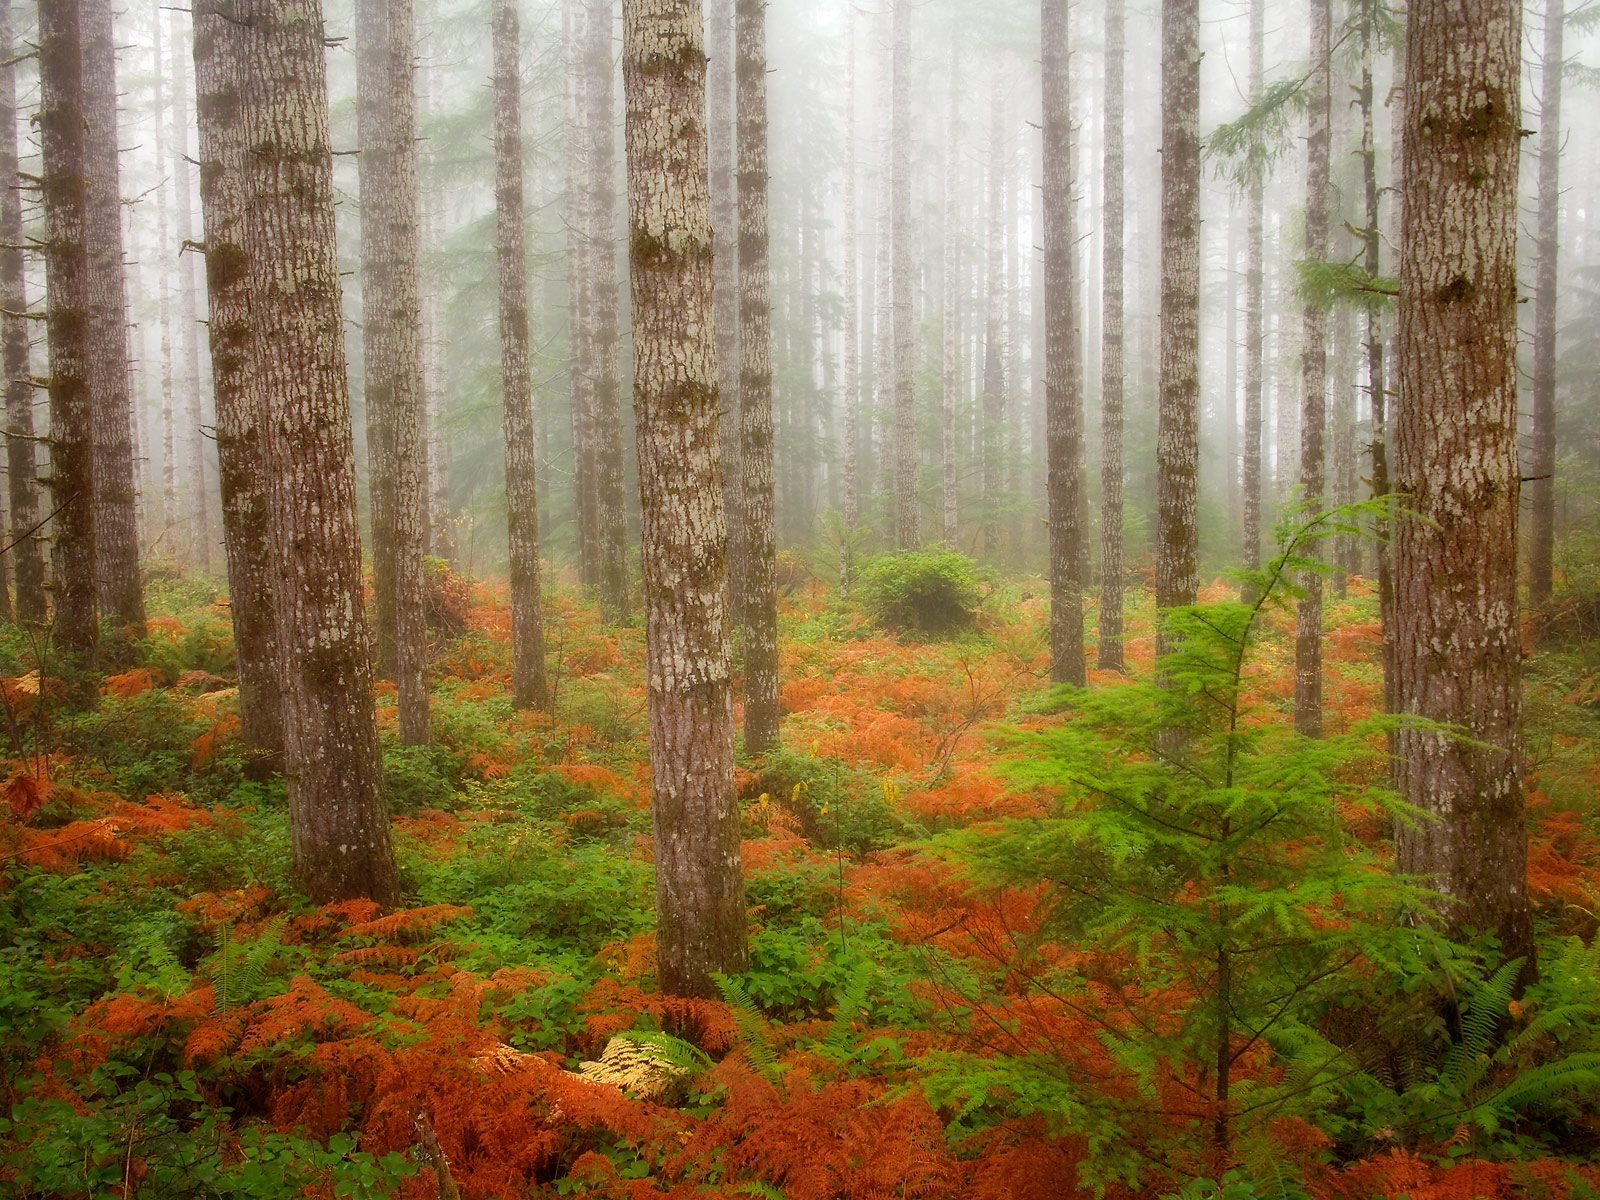 Fall-colored douglas fir trees in Olympic National Park, Washington.